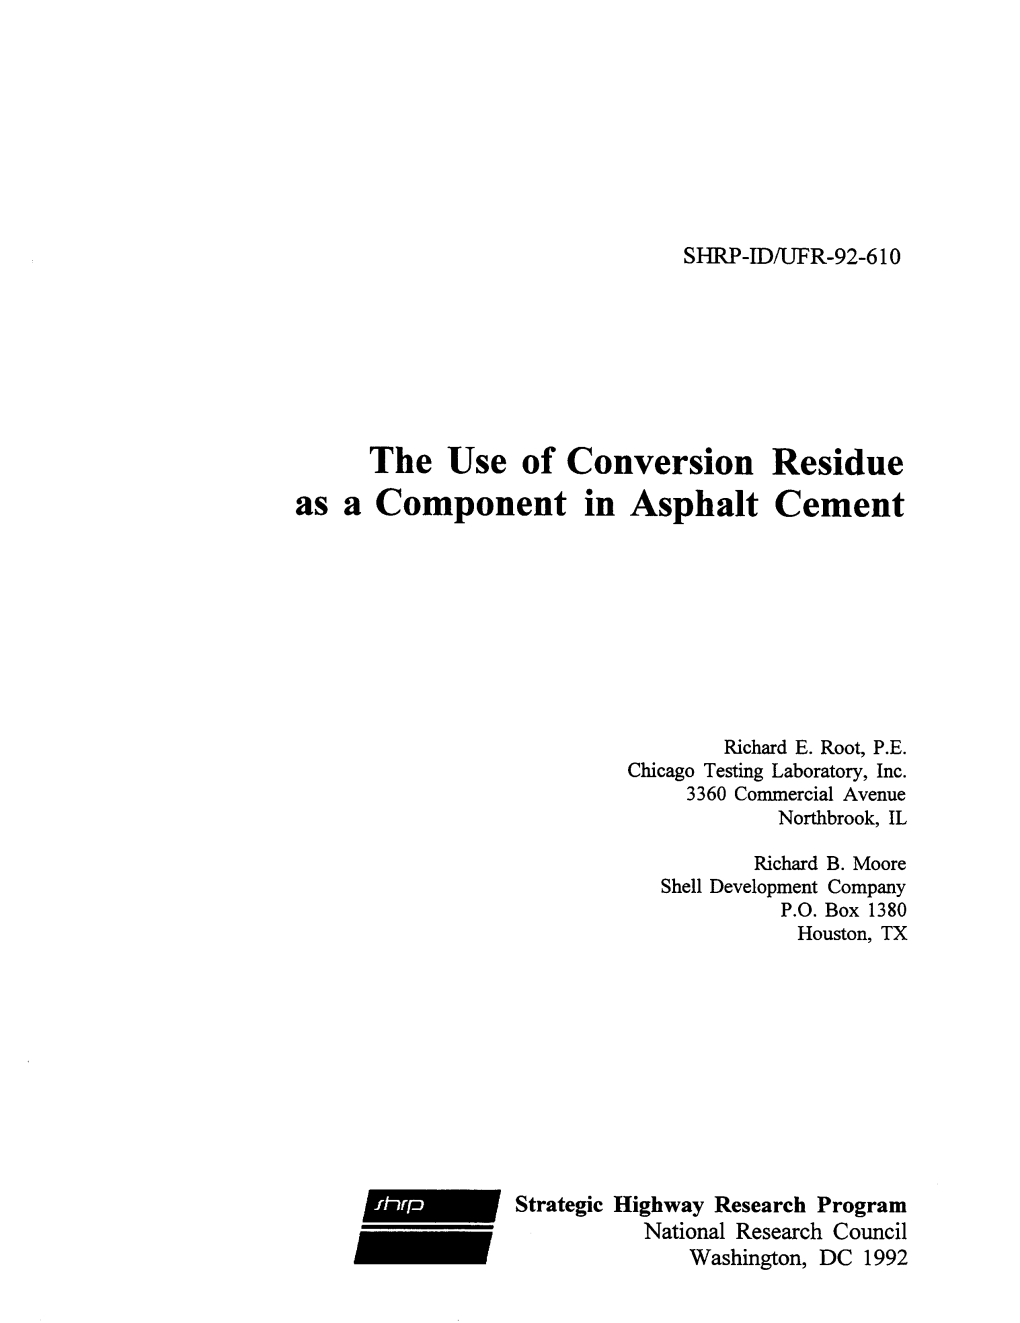 The Use of Conversion Residue As a Component in Asphalt Cement